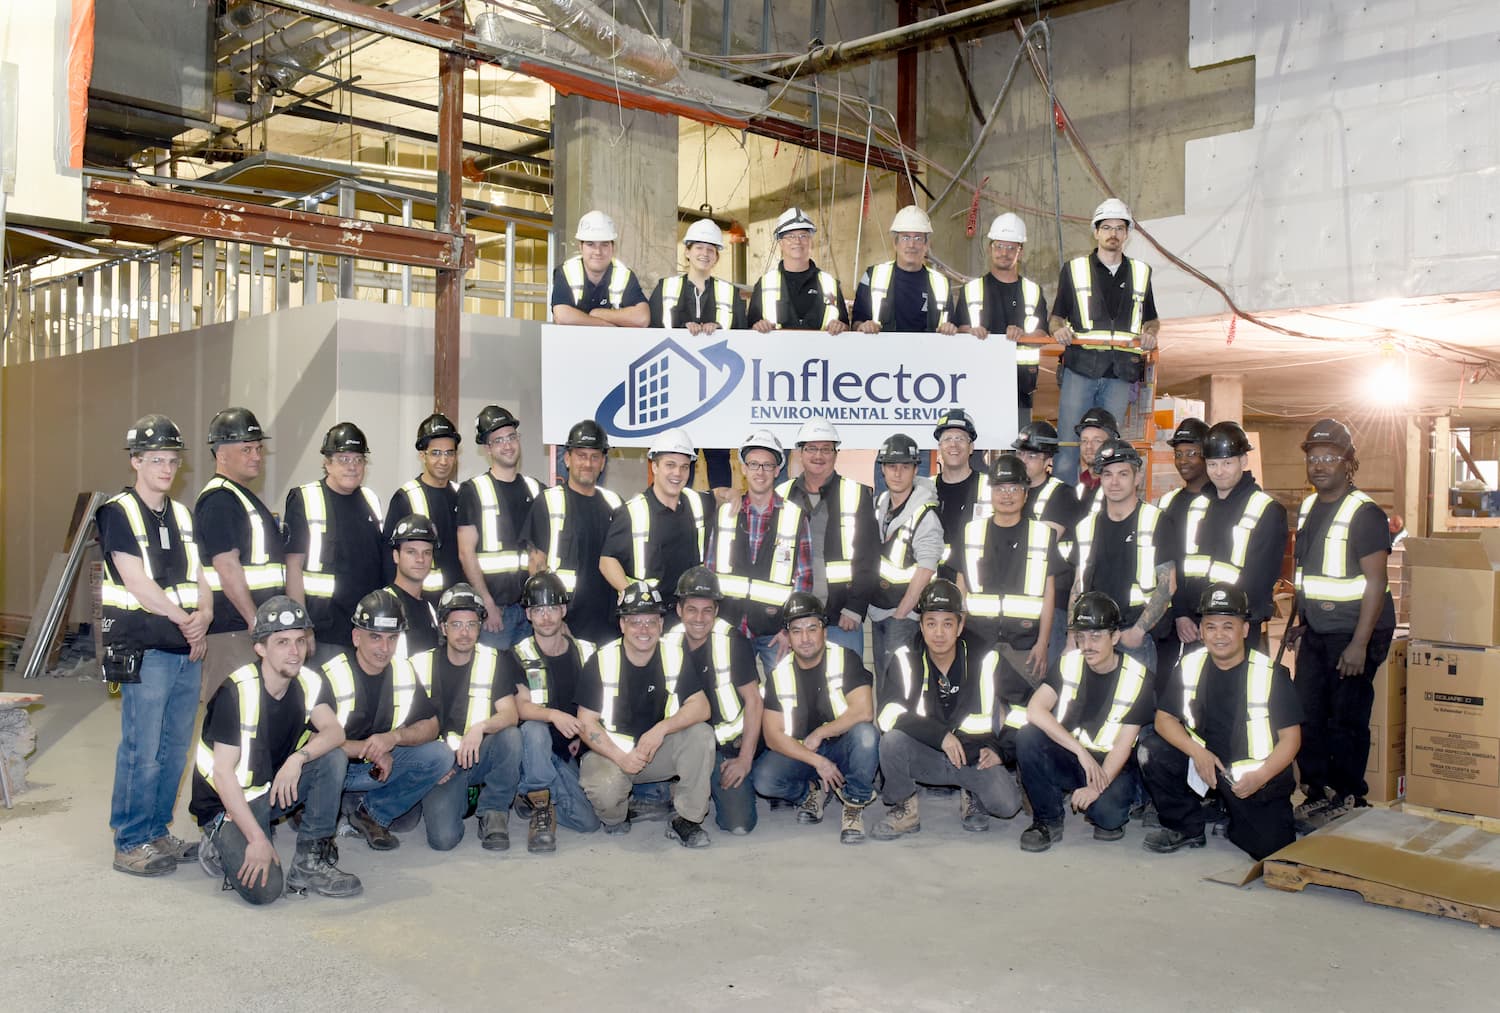 Large group of workers wearing safety vests and helmets with Inflector banner